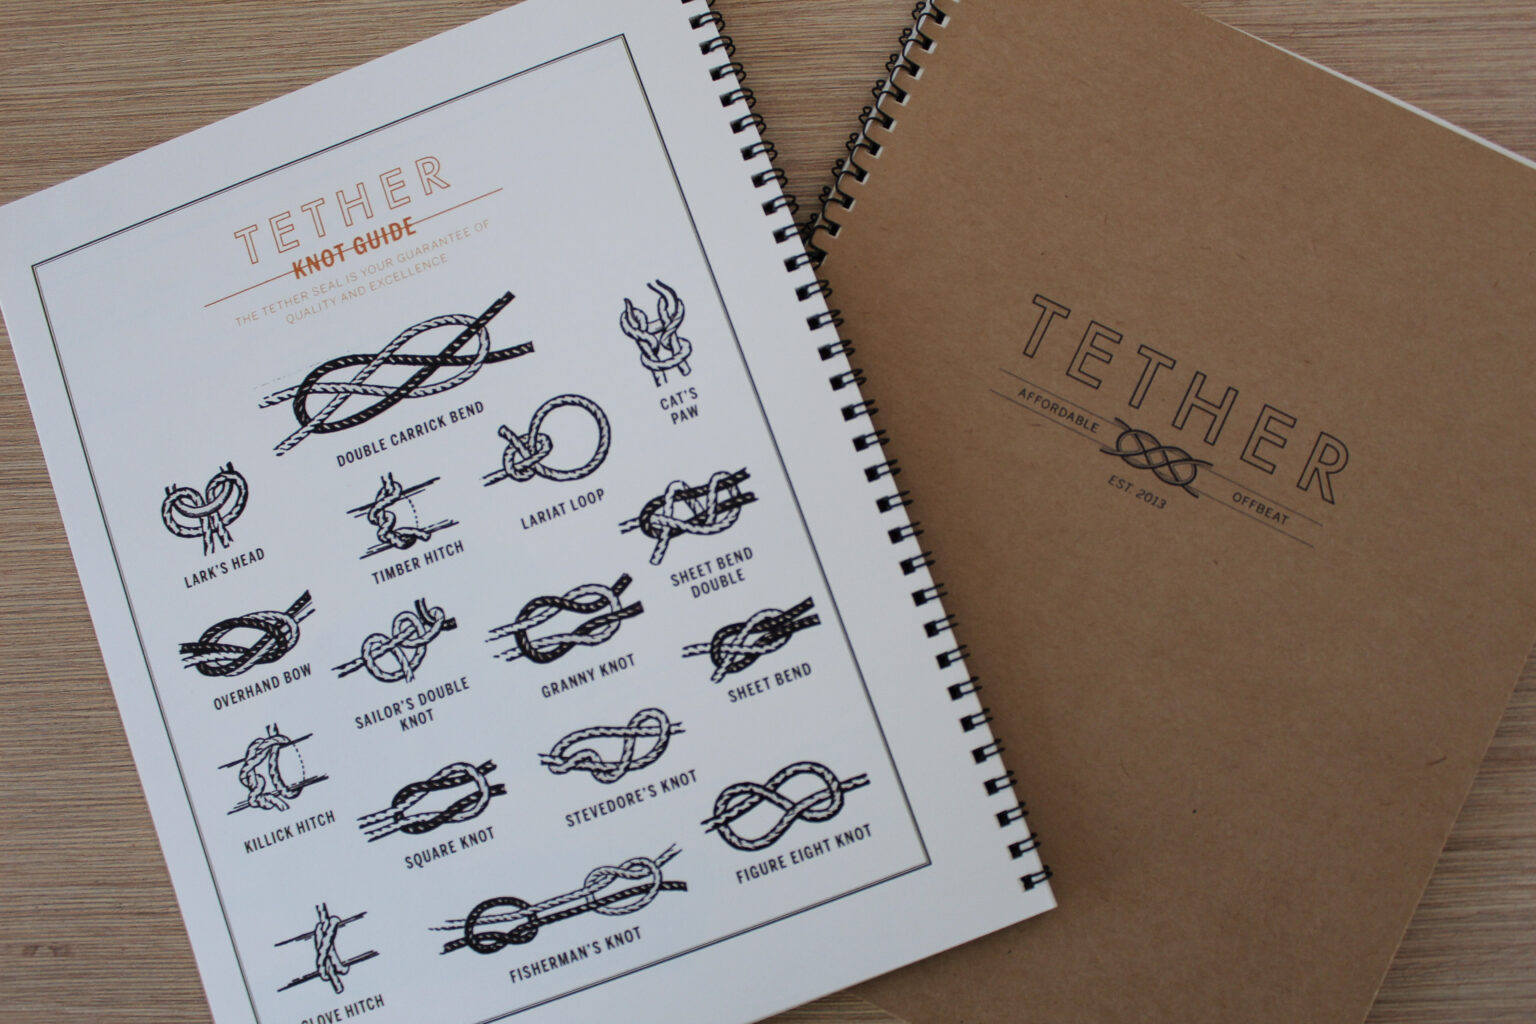 Tether Project Materials – report front and back covers